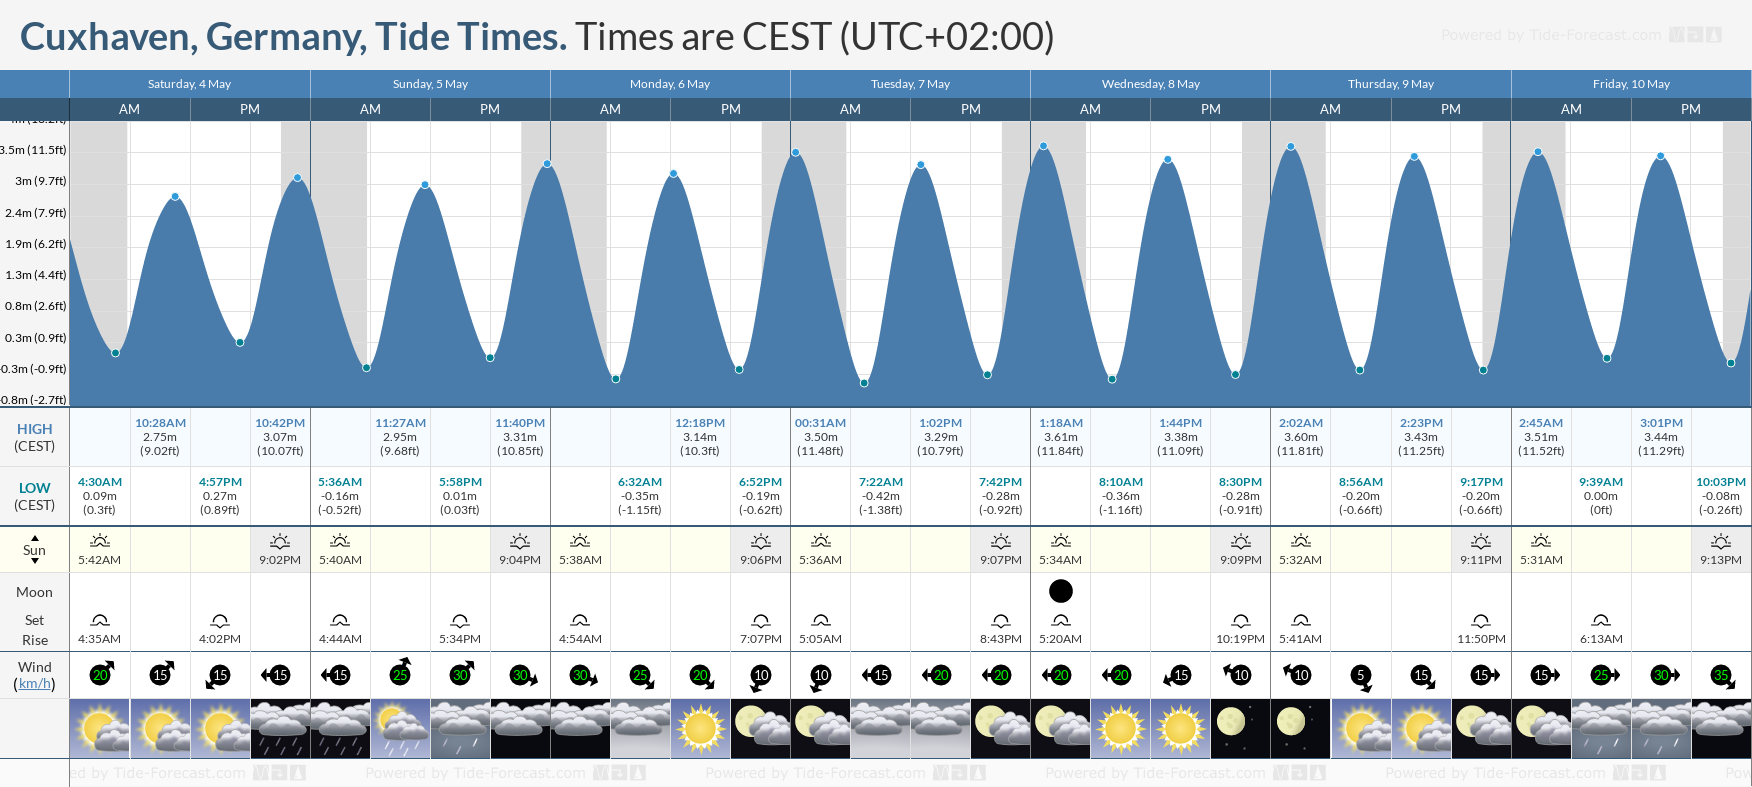 Cuxhaven, Germany Tide Chart including high and low tide times for the next 7 days